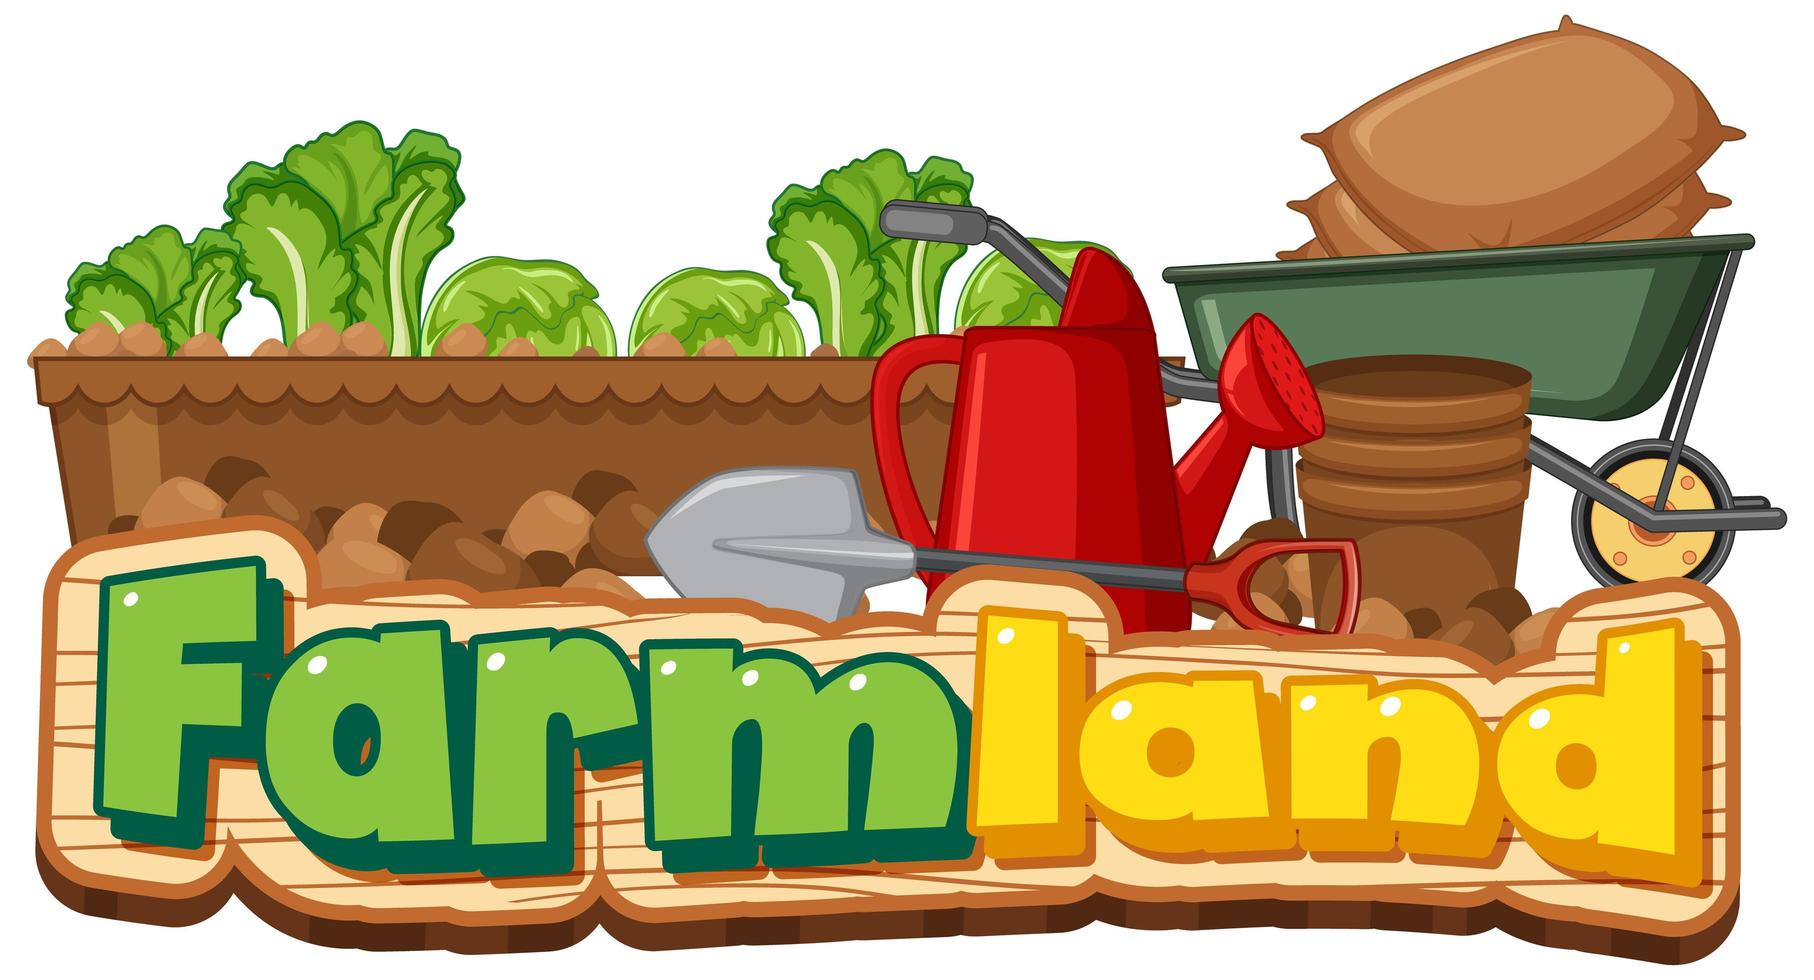 Farmland or banner with gardening tools vector